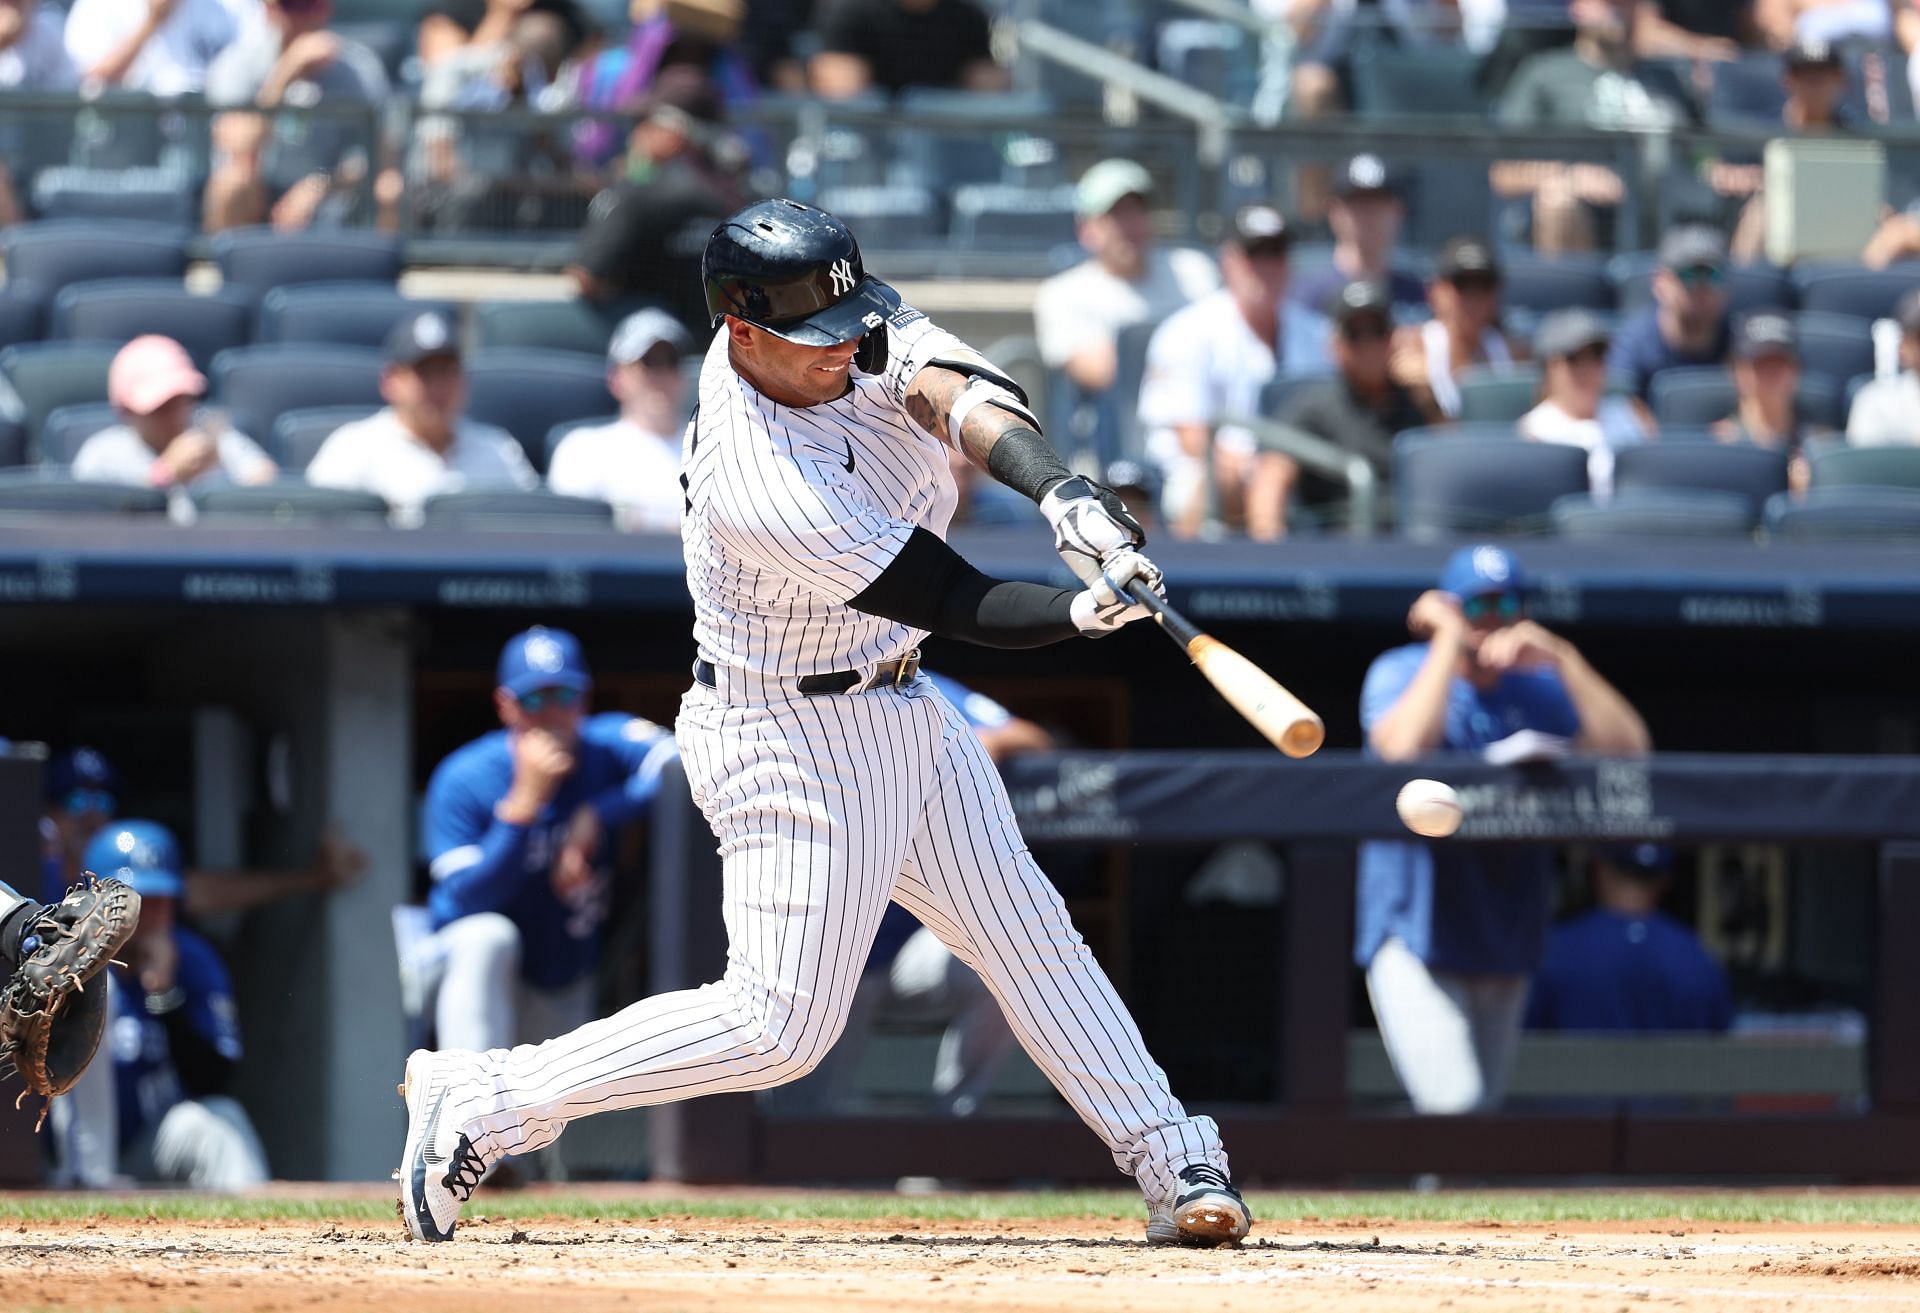 Gleyber Torres of the New York Yankees bats against the Kansas City Royals during a game at Yankee Stadium